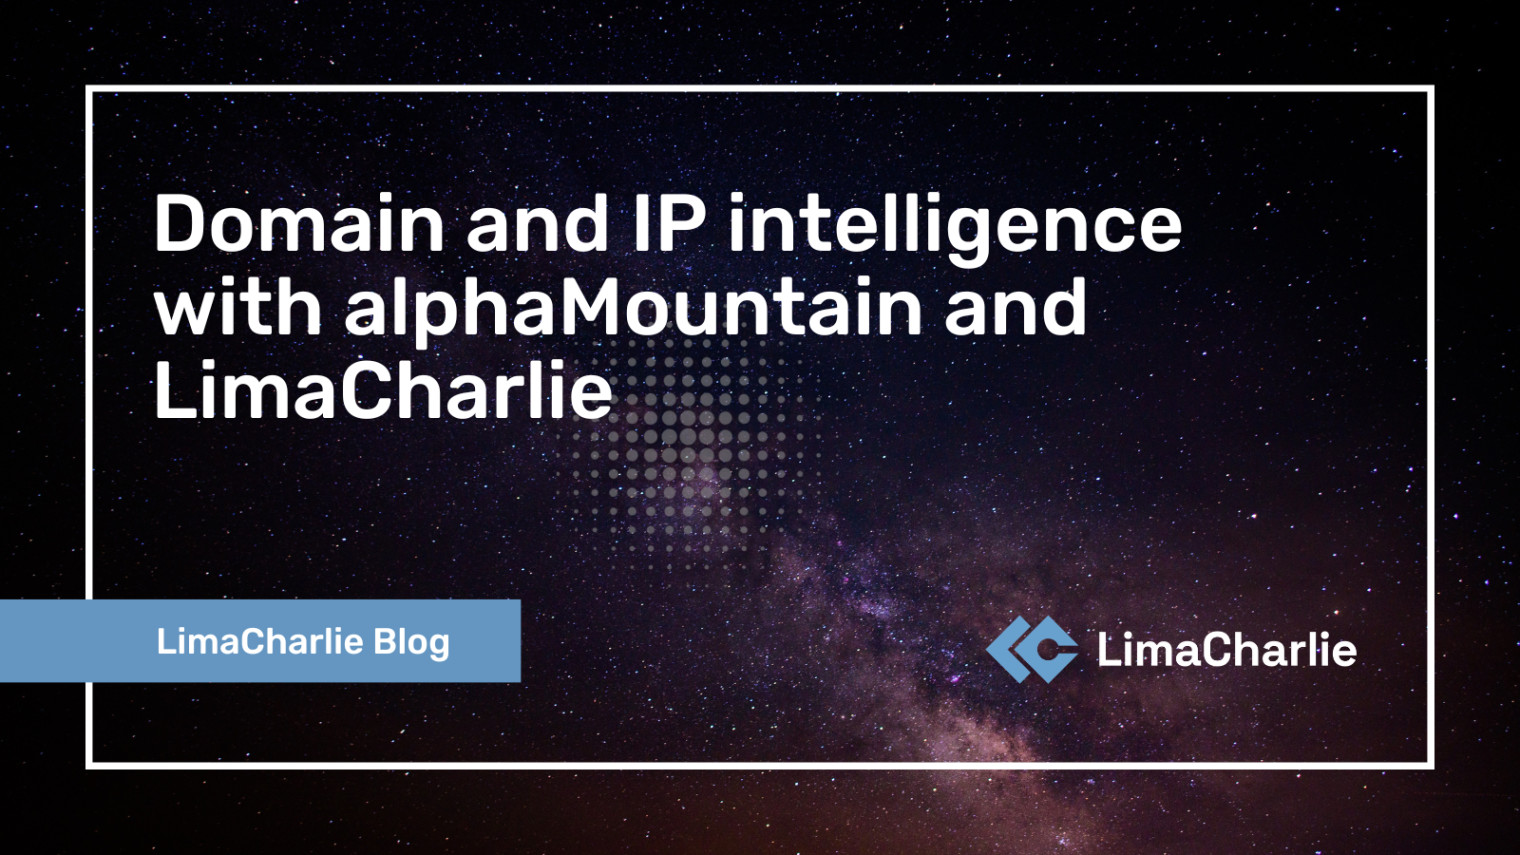 Domain and IP intelligence with alphaMountain and LimaCharlie